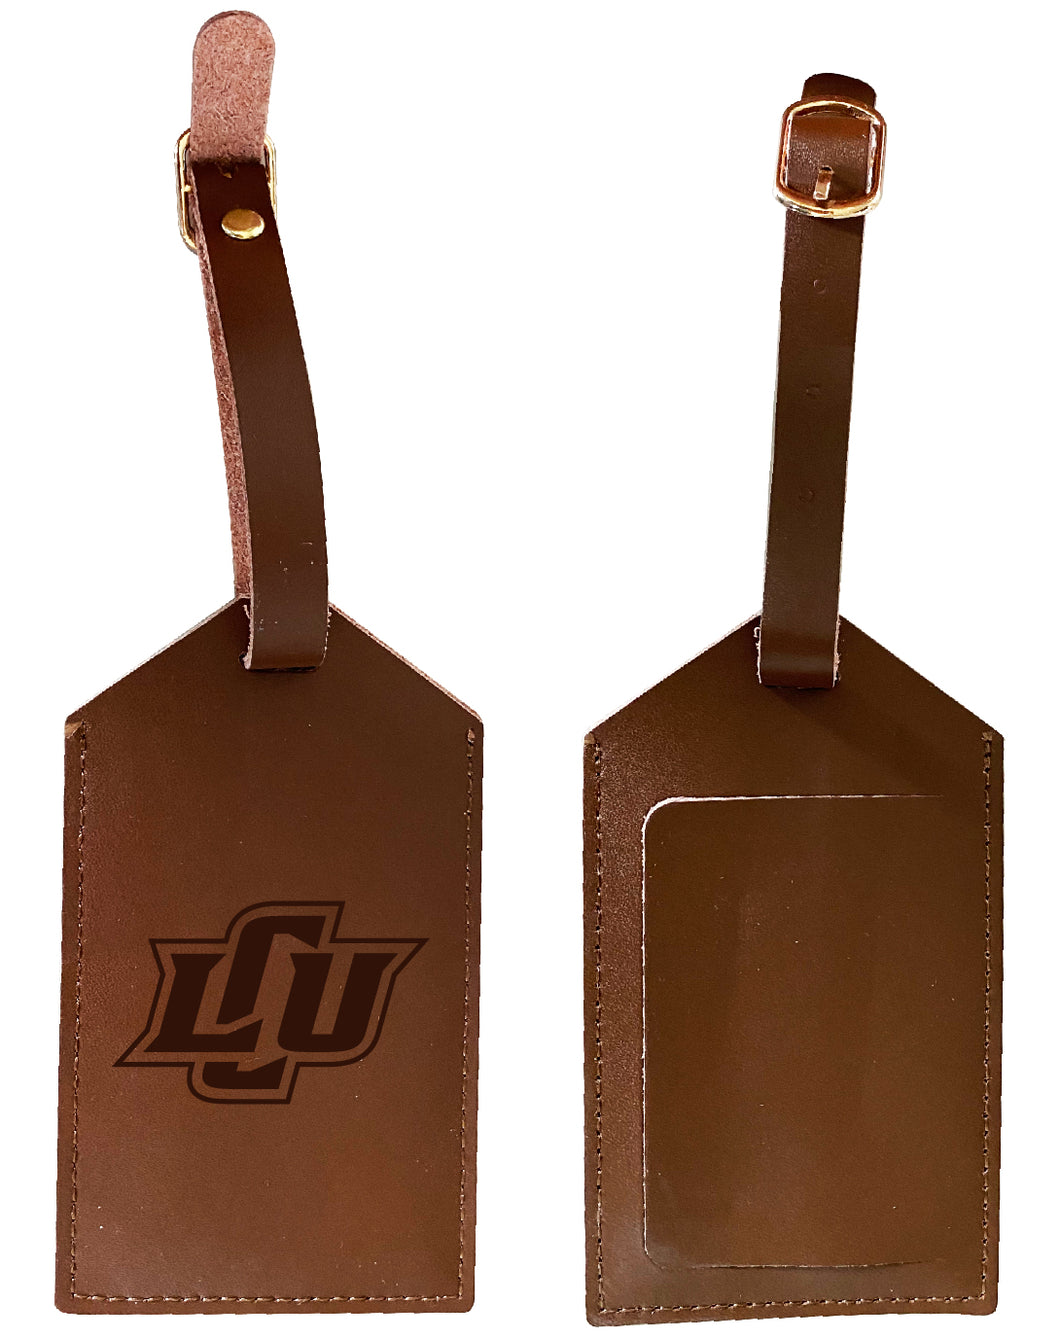 Lubbock Christian University Chaparral Leather Luggage Tag Engraved